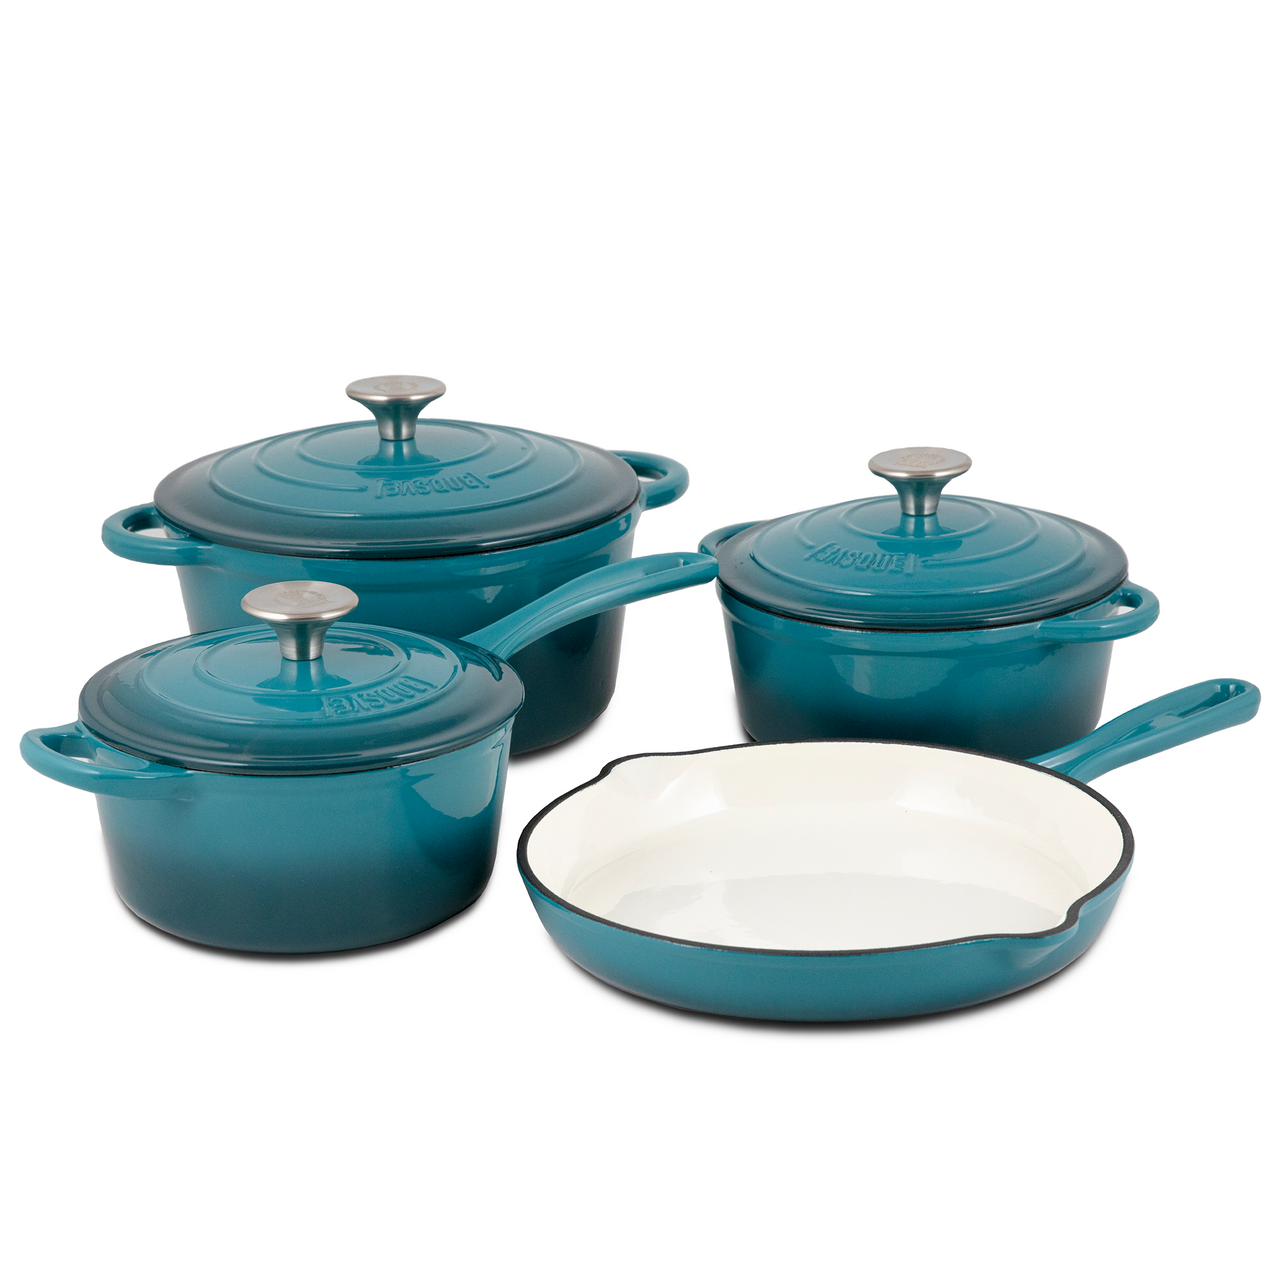 Basque 7-Piece Enameled Cast Iron Cookware Set is 48% off